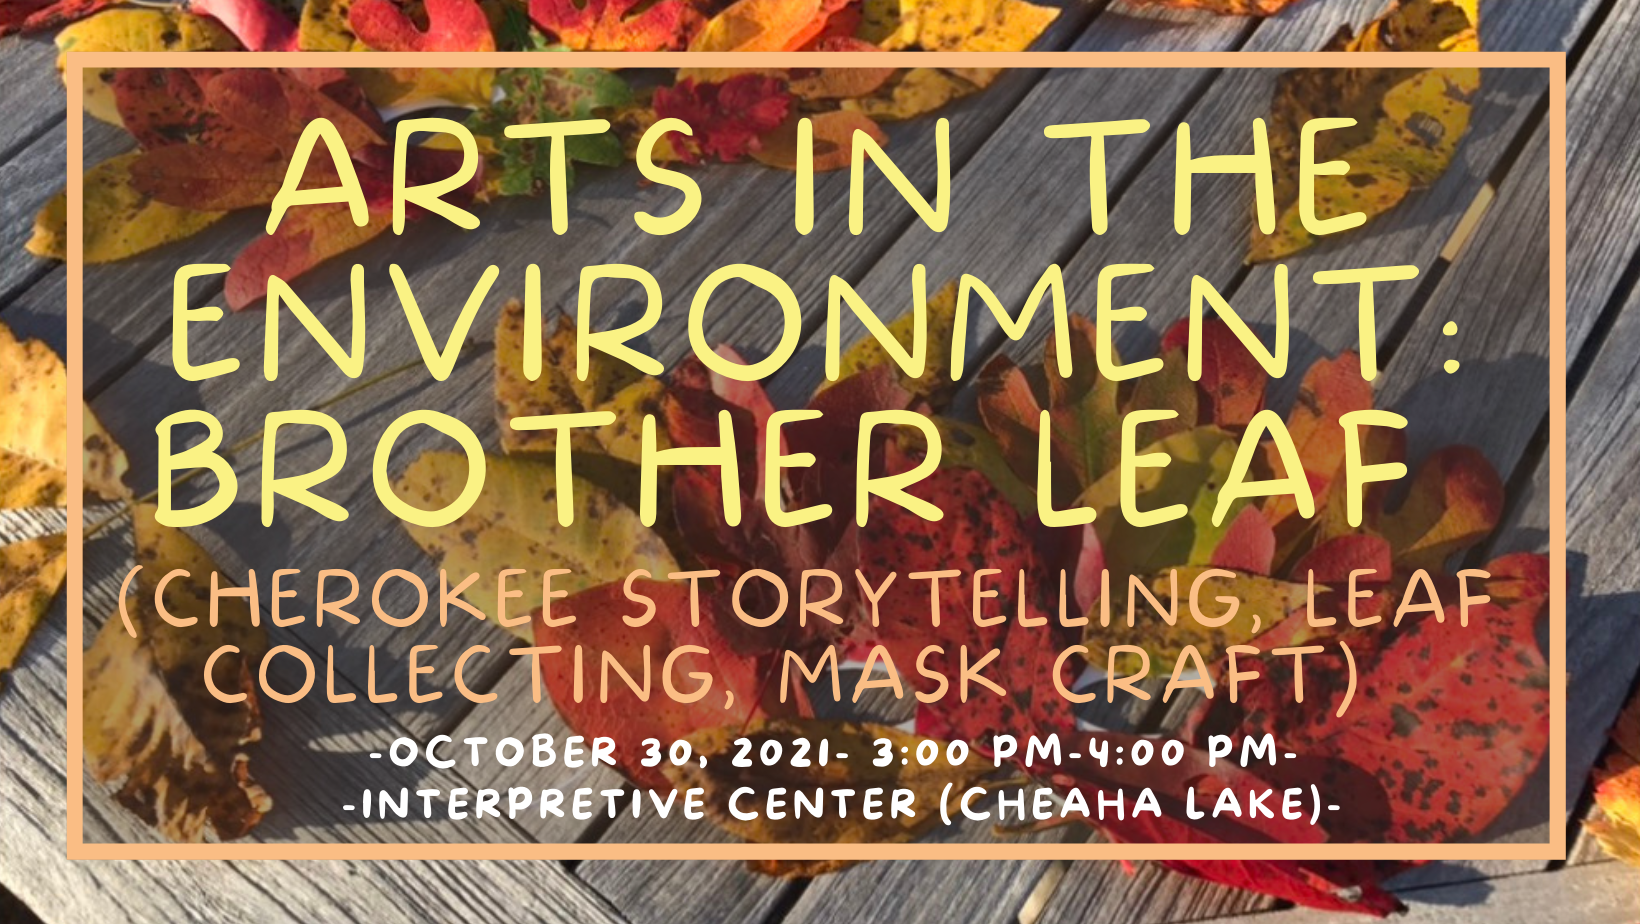 CSP Oct30 2021 Arts in the Environment: Brother Leaf (Cherokee Storytelling, Leaf Collecting, Mask Craft)